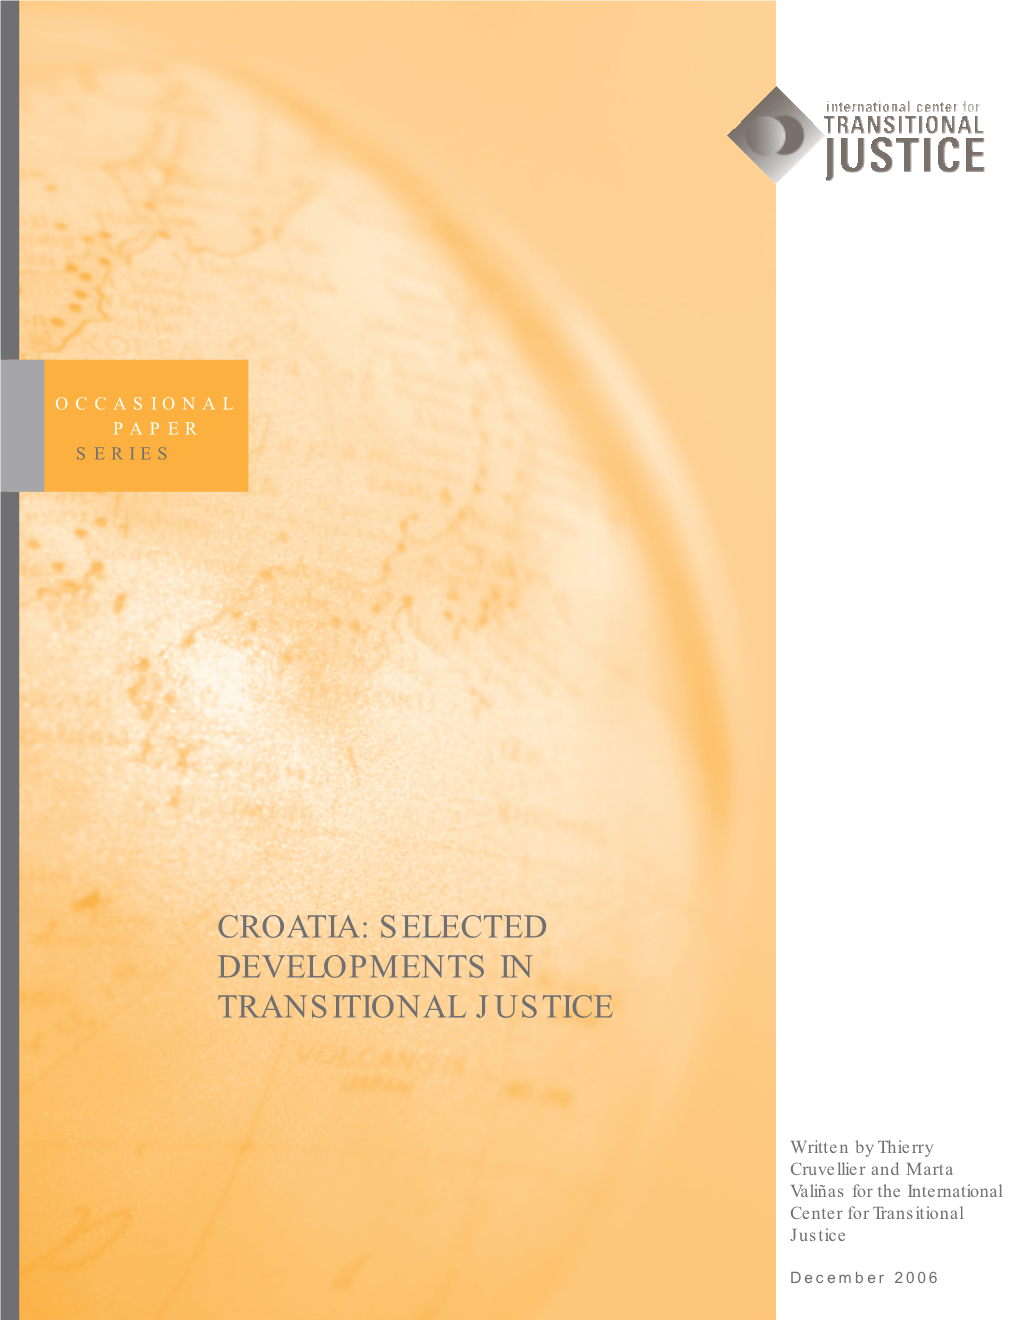 Croatia: Selected Developments in Transitional Justice